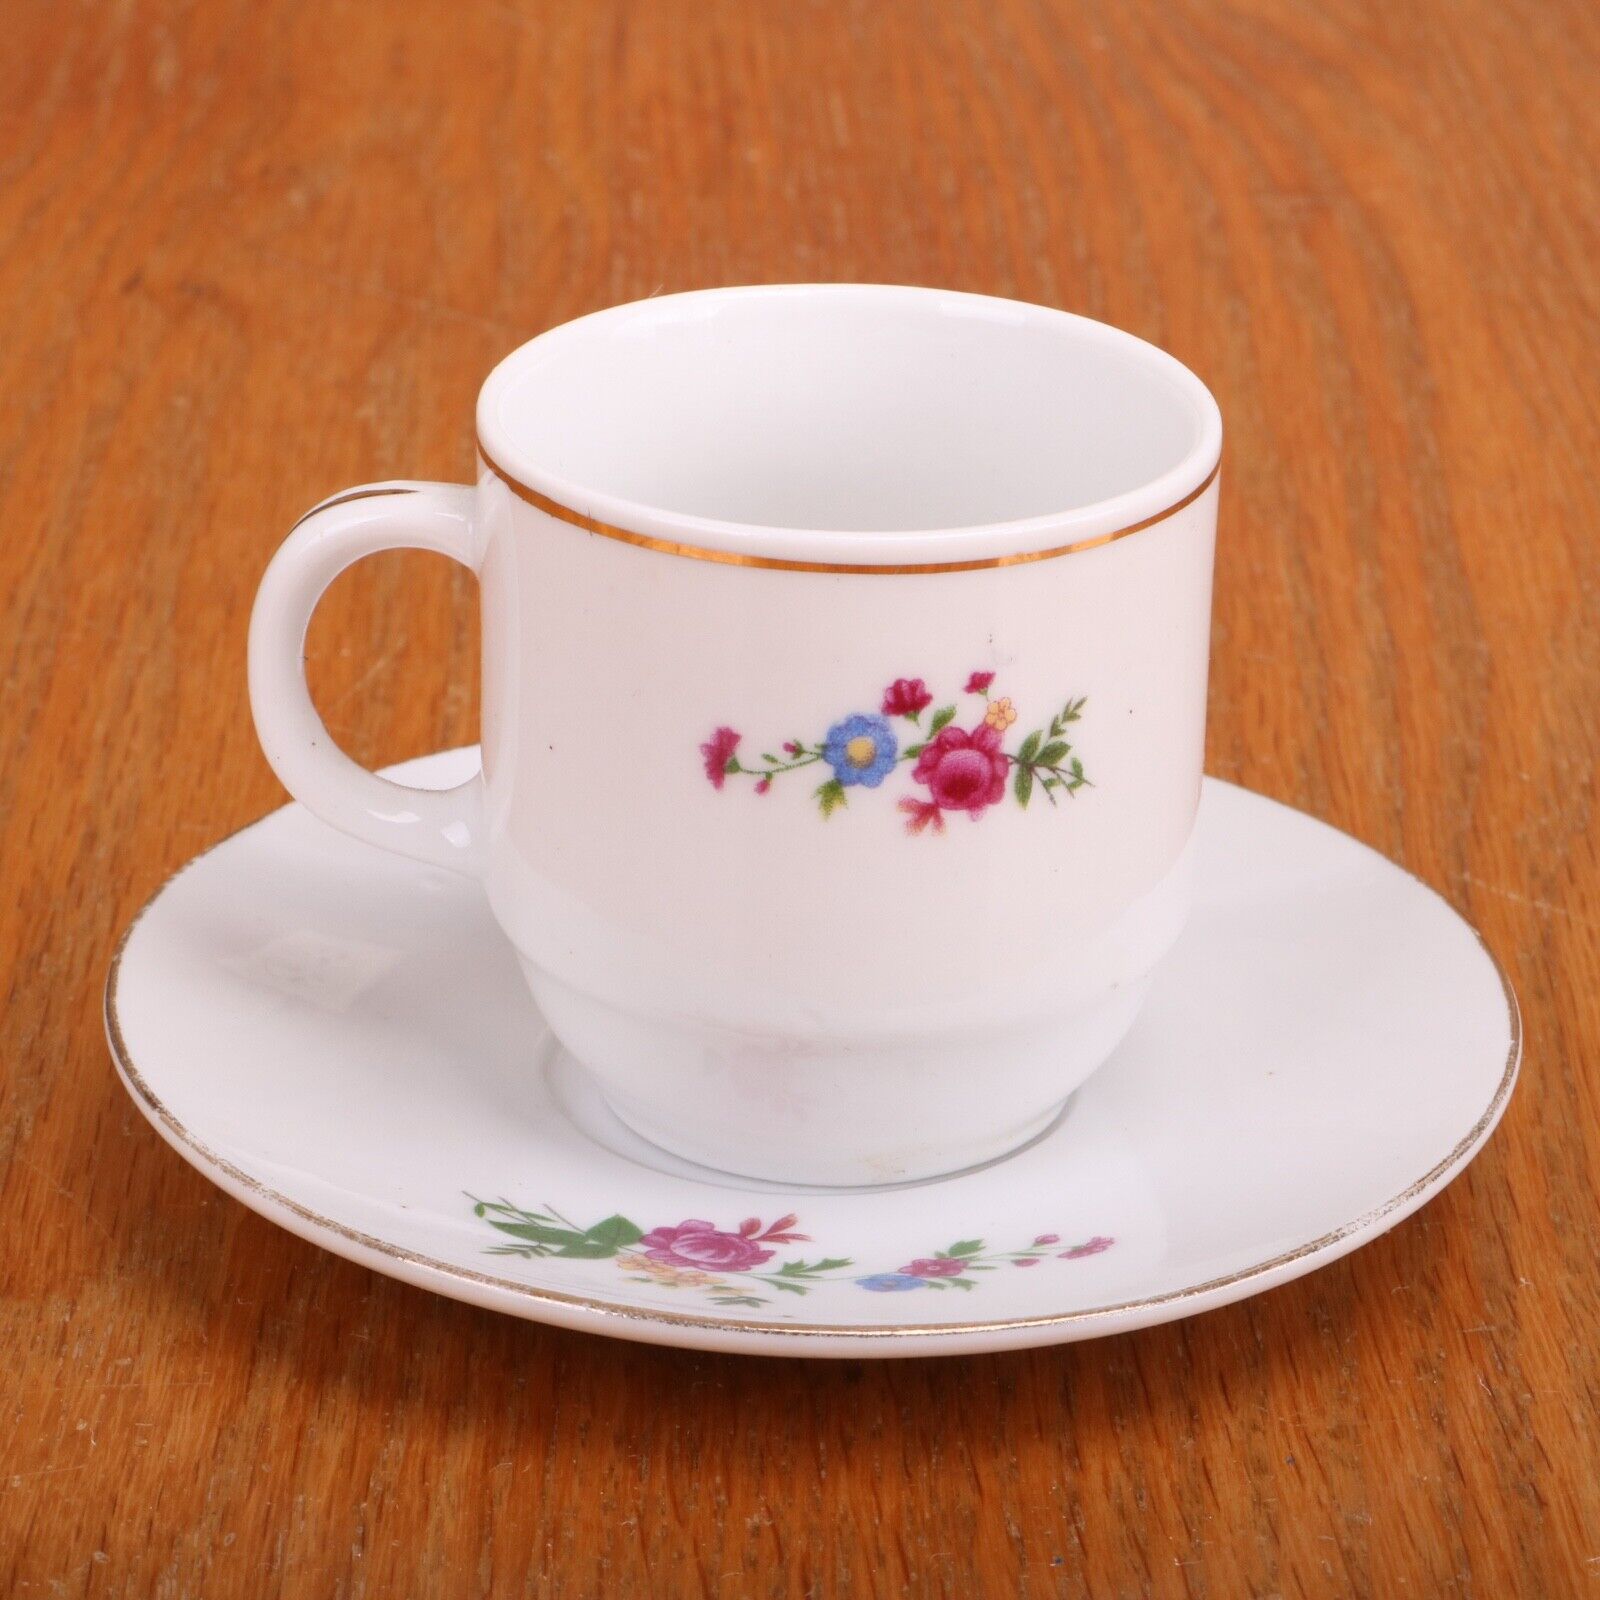 Small Blue Red Flower Floral Cup and Saucer Tea China Demitasse 